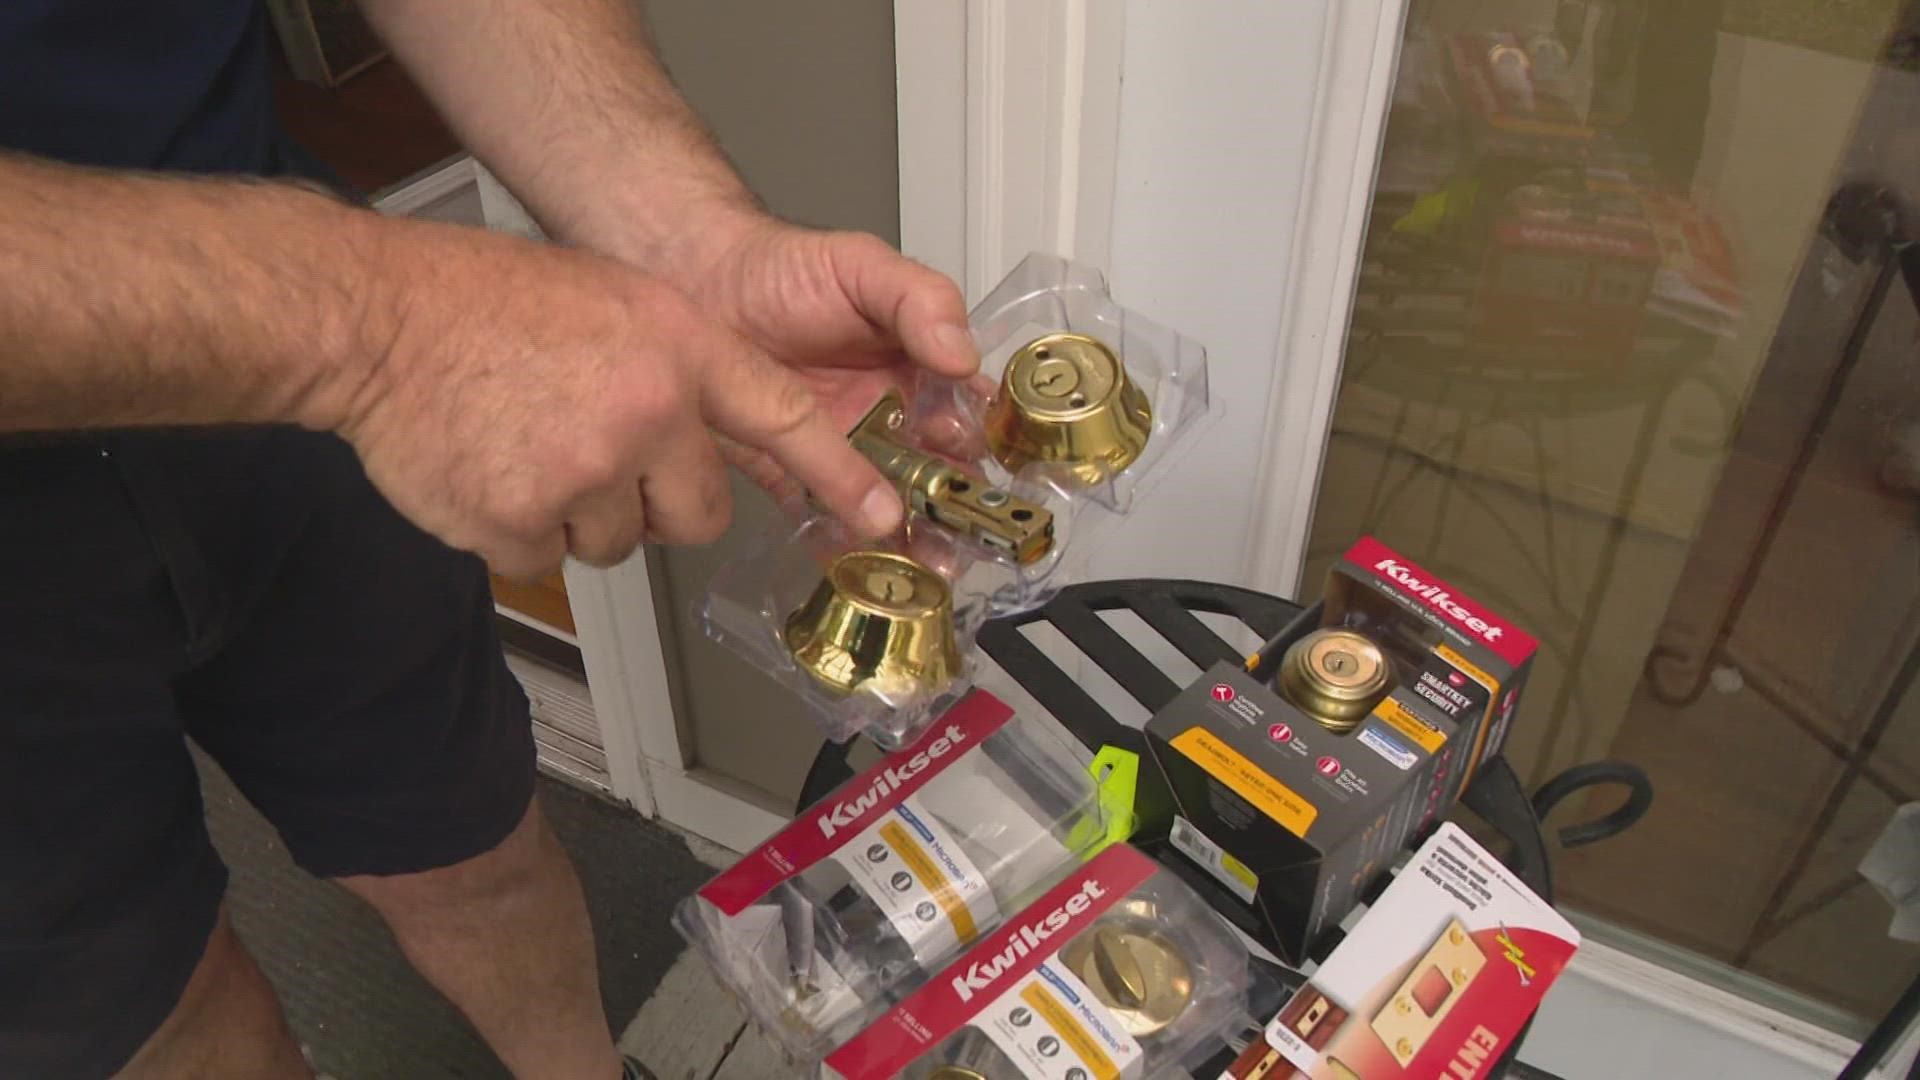 Pat Sullivan, from Sullivan Hardware & Garden, shares how the right lighting and locks can keep your home safe.